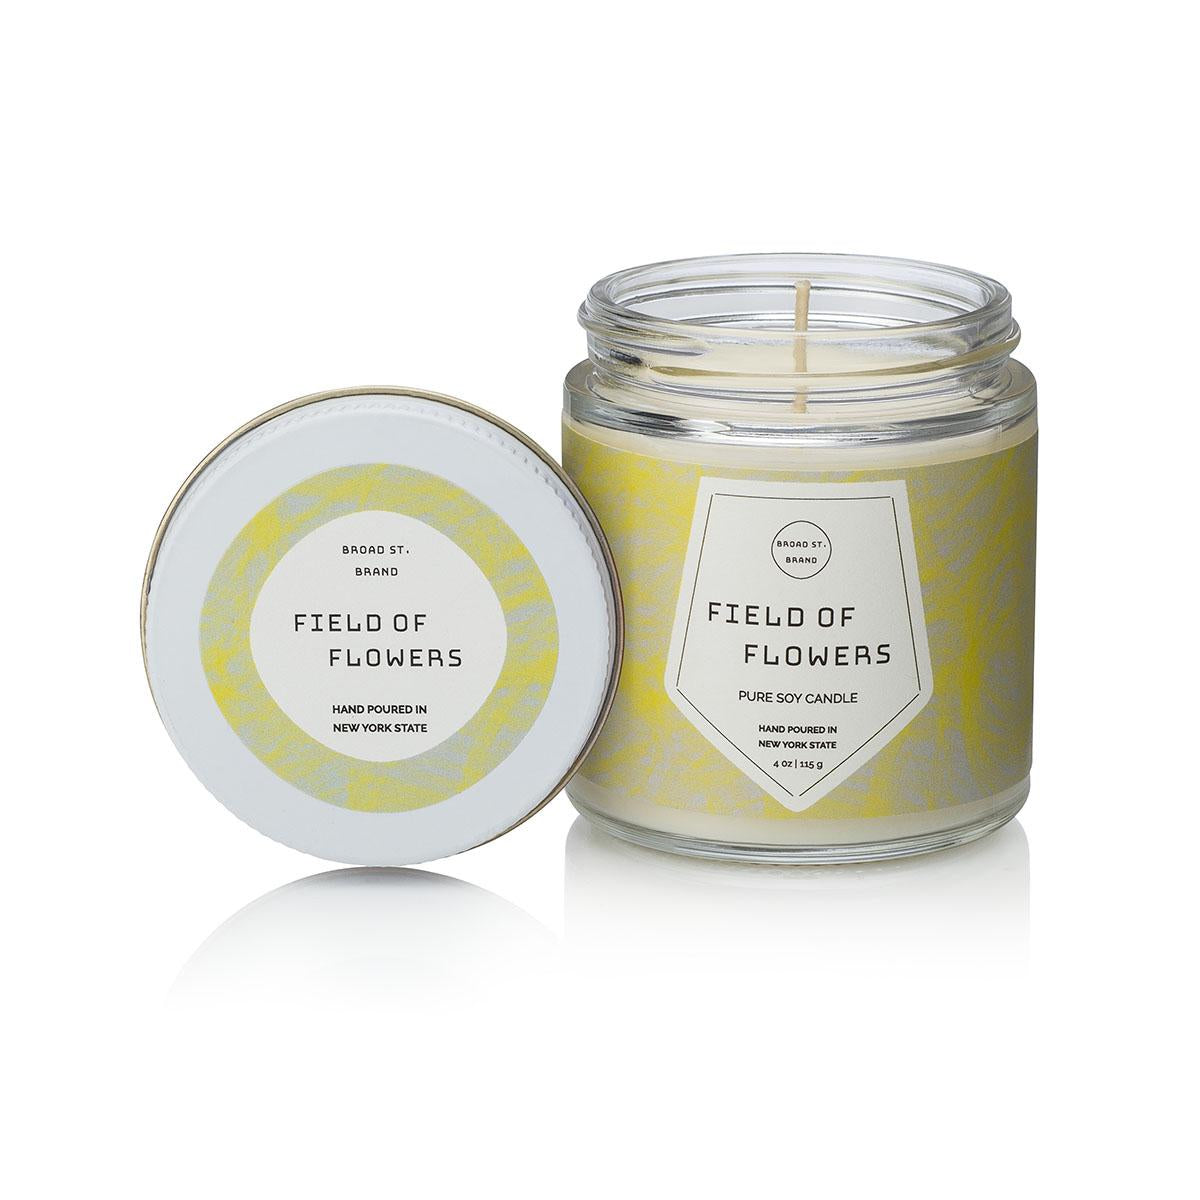 Primary image of Field of Flowers Pure Soy Candle